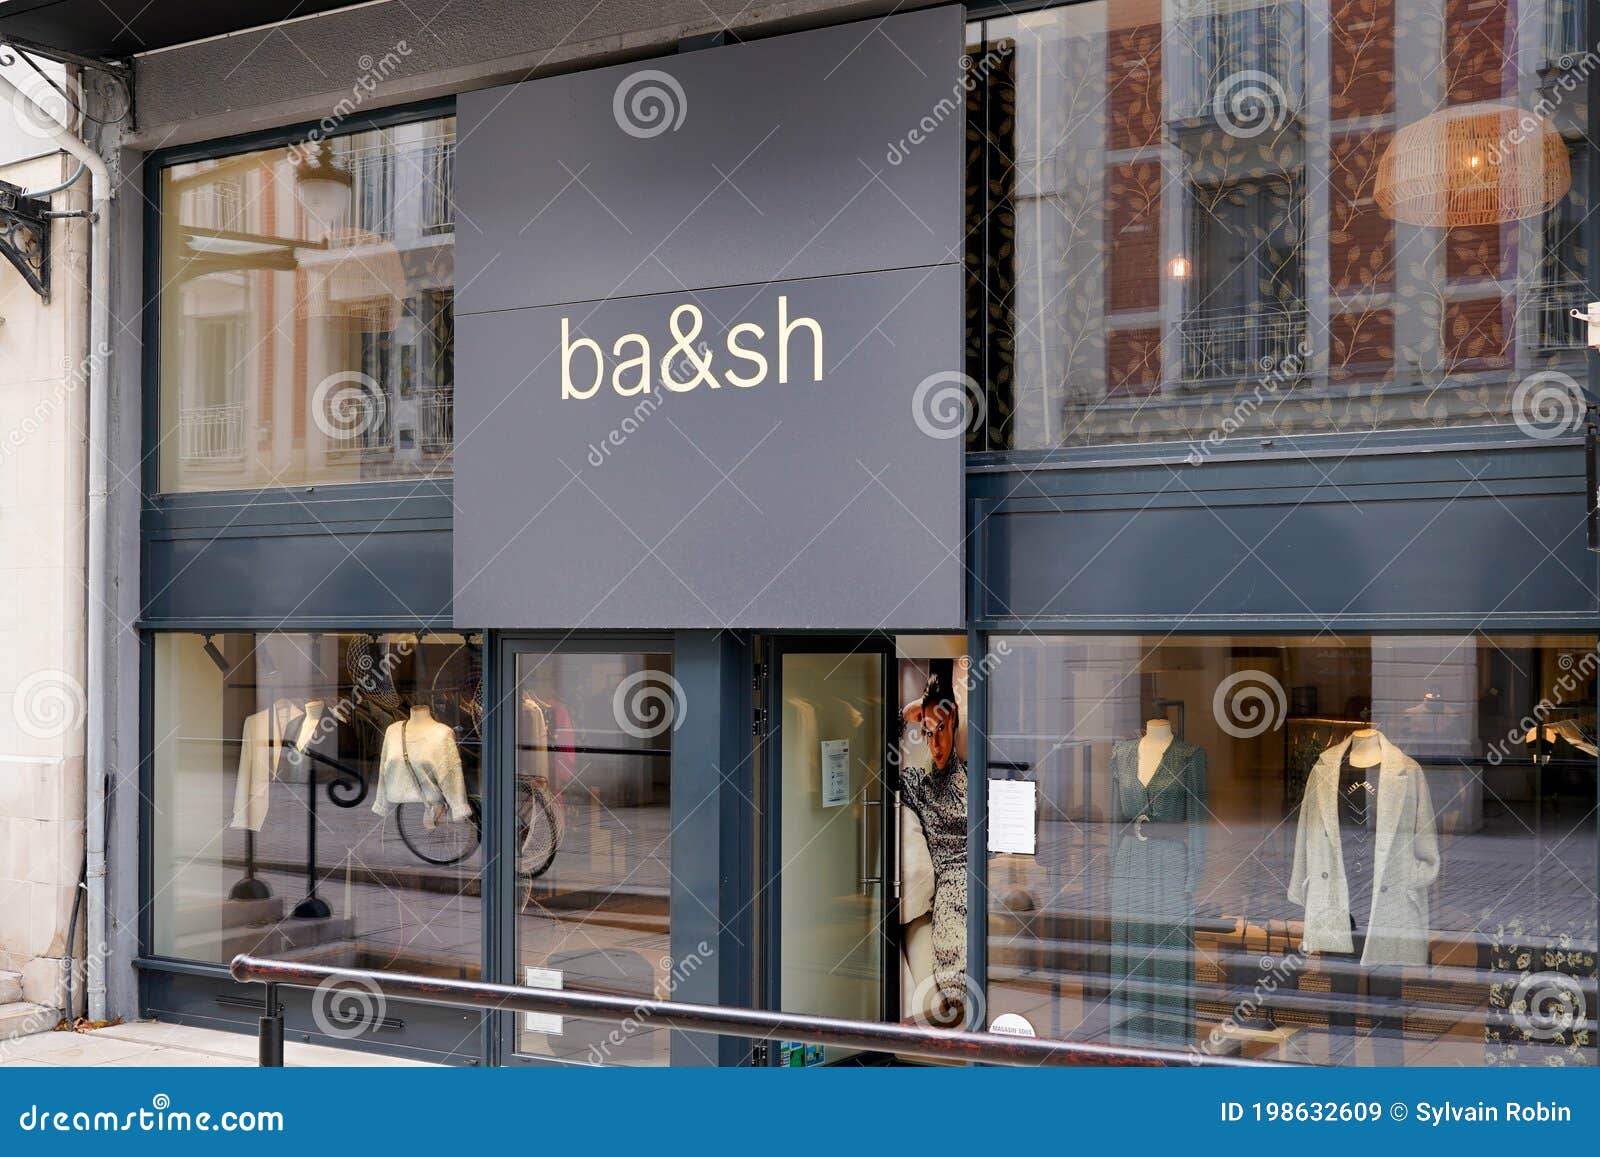 Ba&sh Sign Text and Logo Front of Store of Fashion Women Clothing Shop  Editorial Stock Image - Image of grey, modern: 198632609